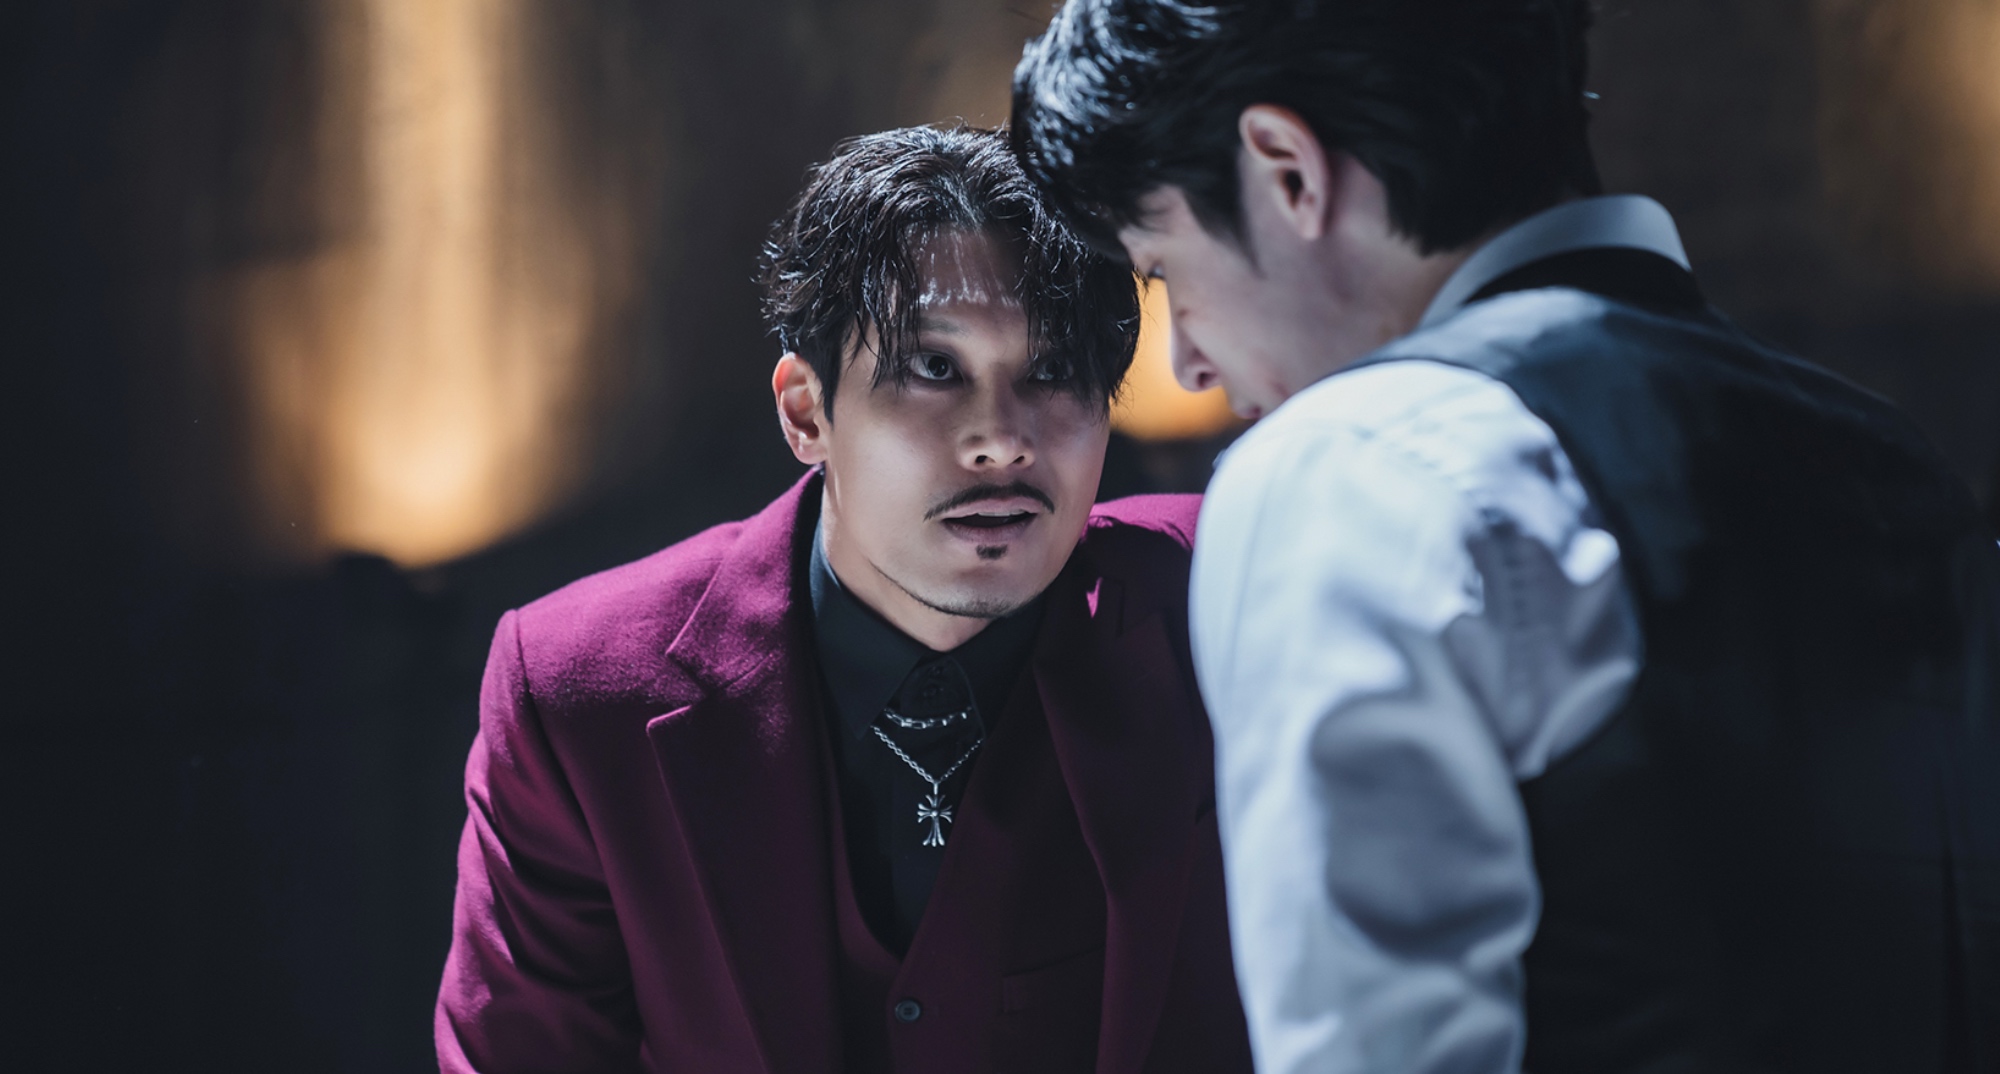 Character Mr. Ha from 'Tomorrow' Episode 16 K-drama wearing red and black suit.